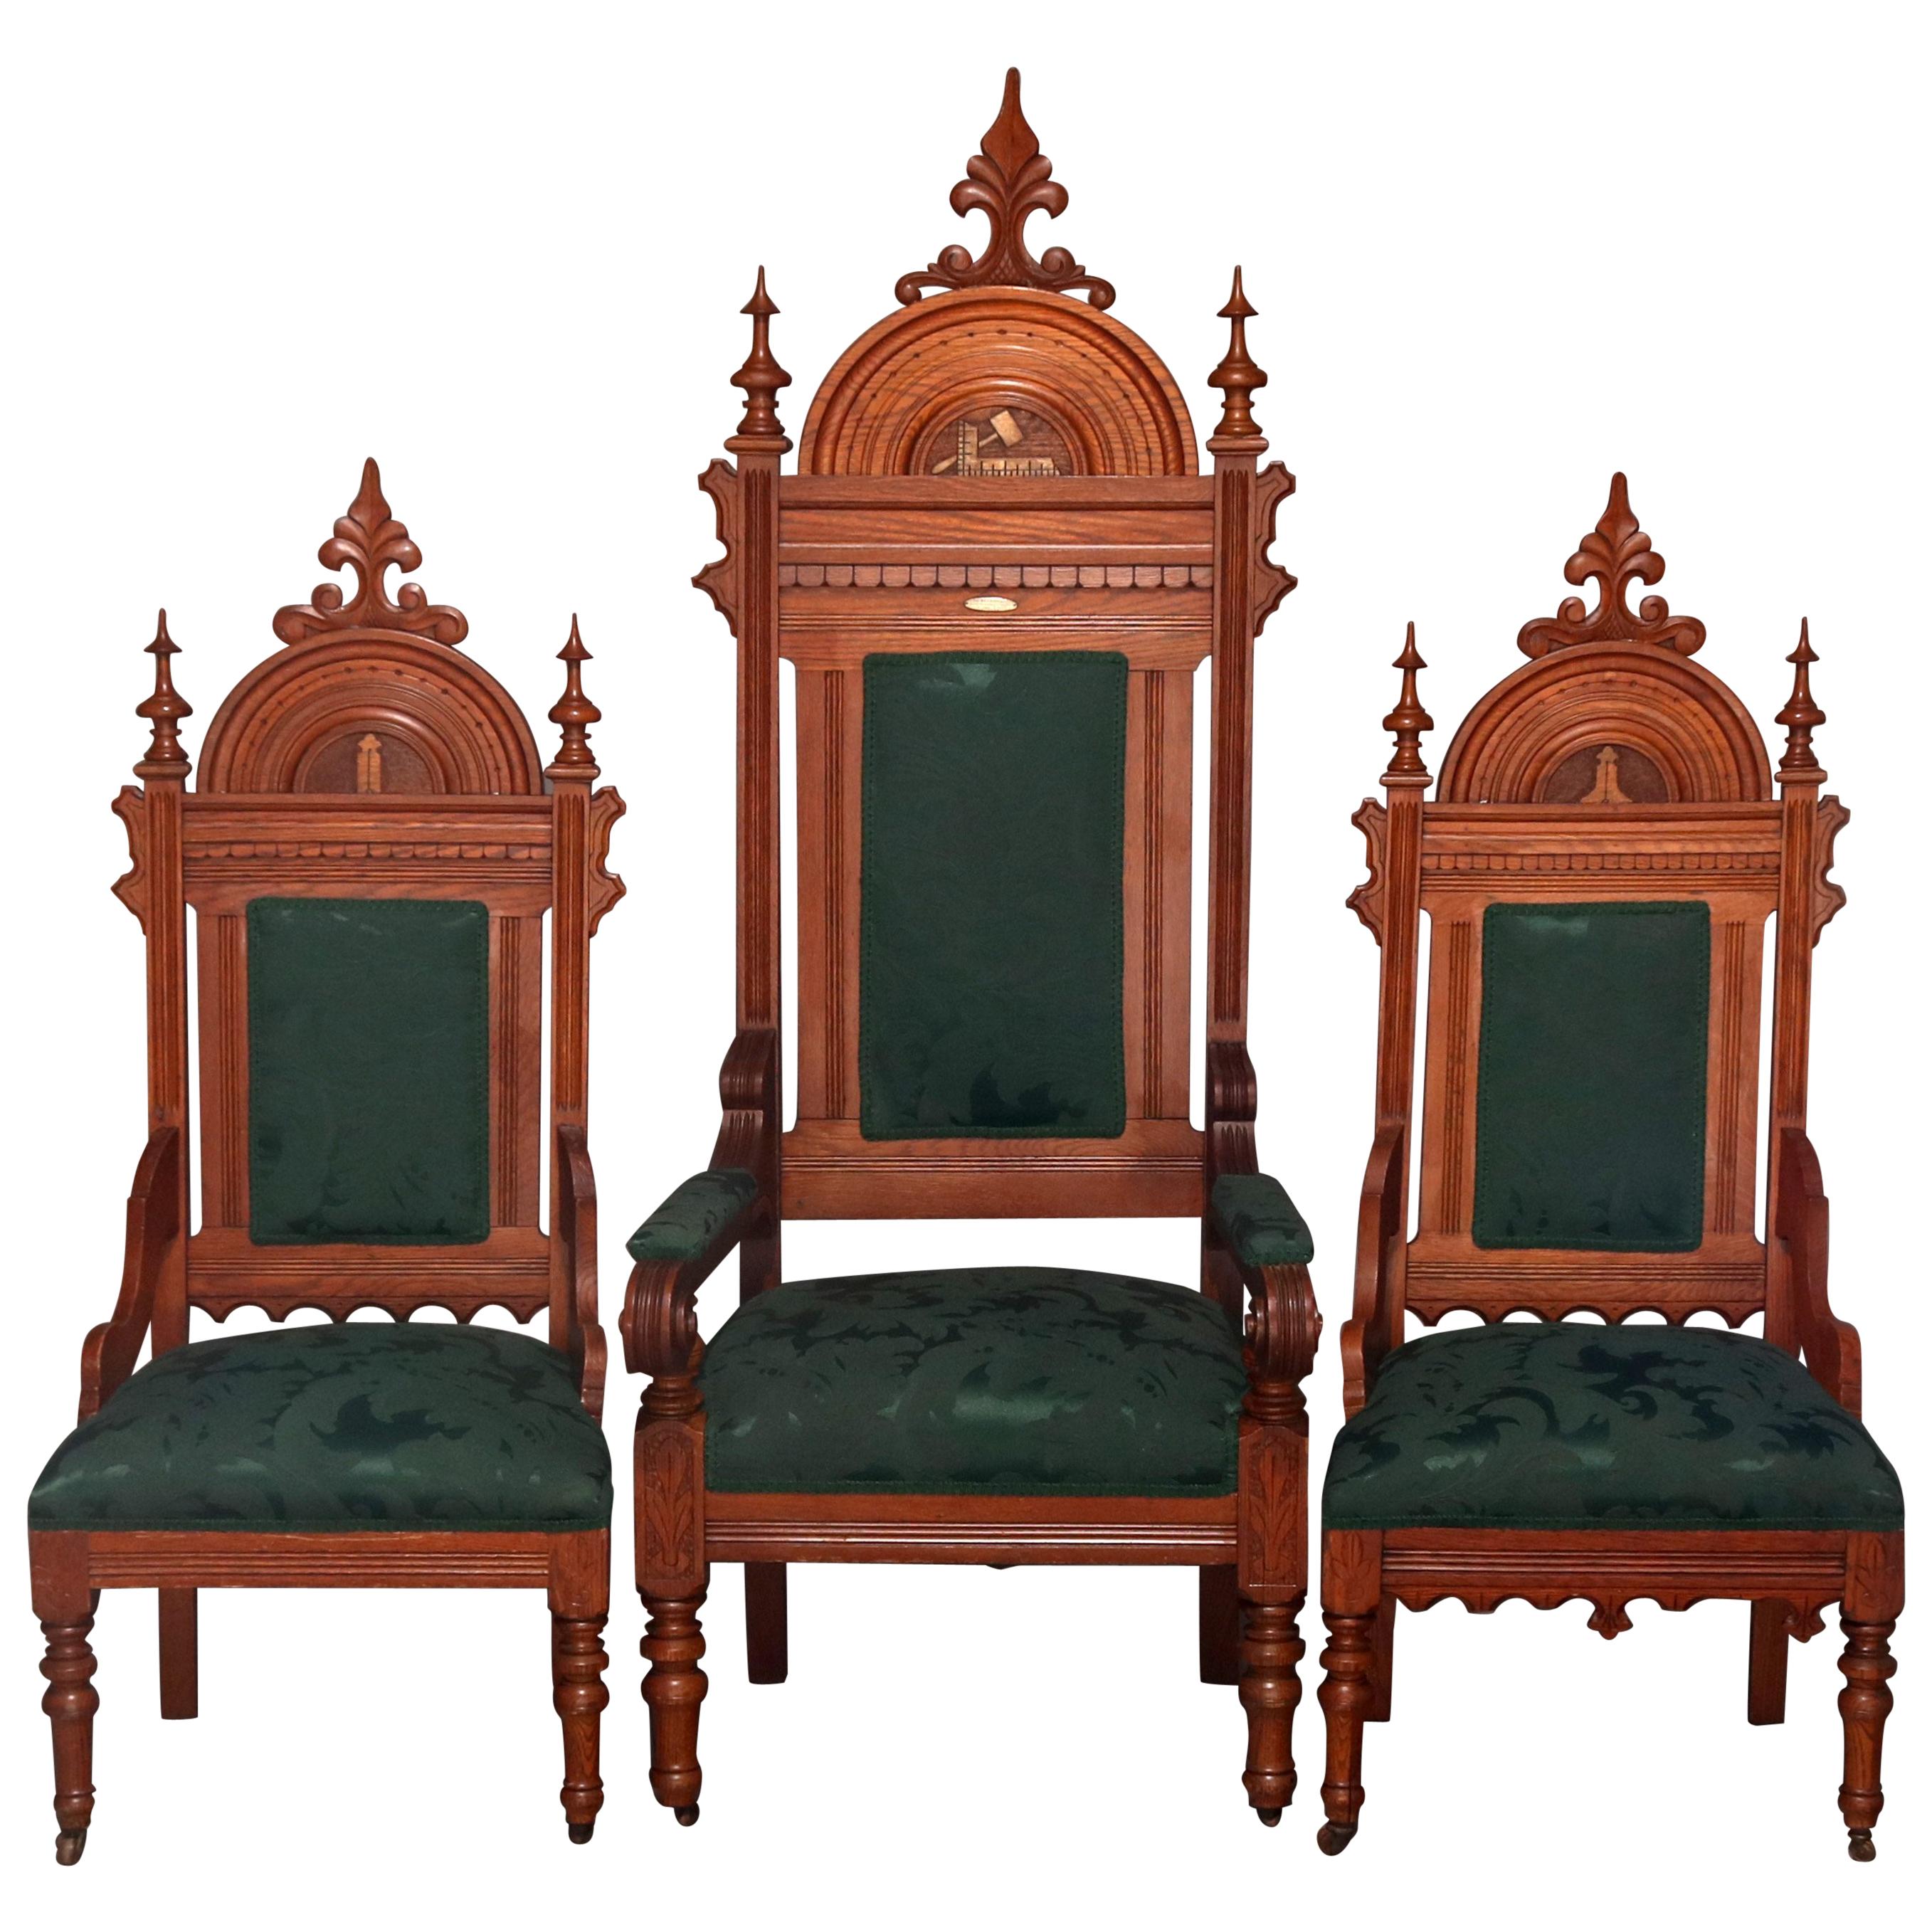 Antique Set of Eastlake Carved Oak Masonic Ceremonial Throne Chairs, circa 1910